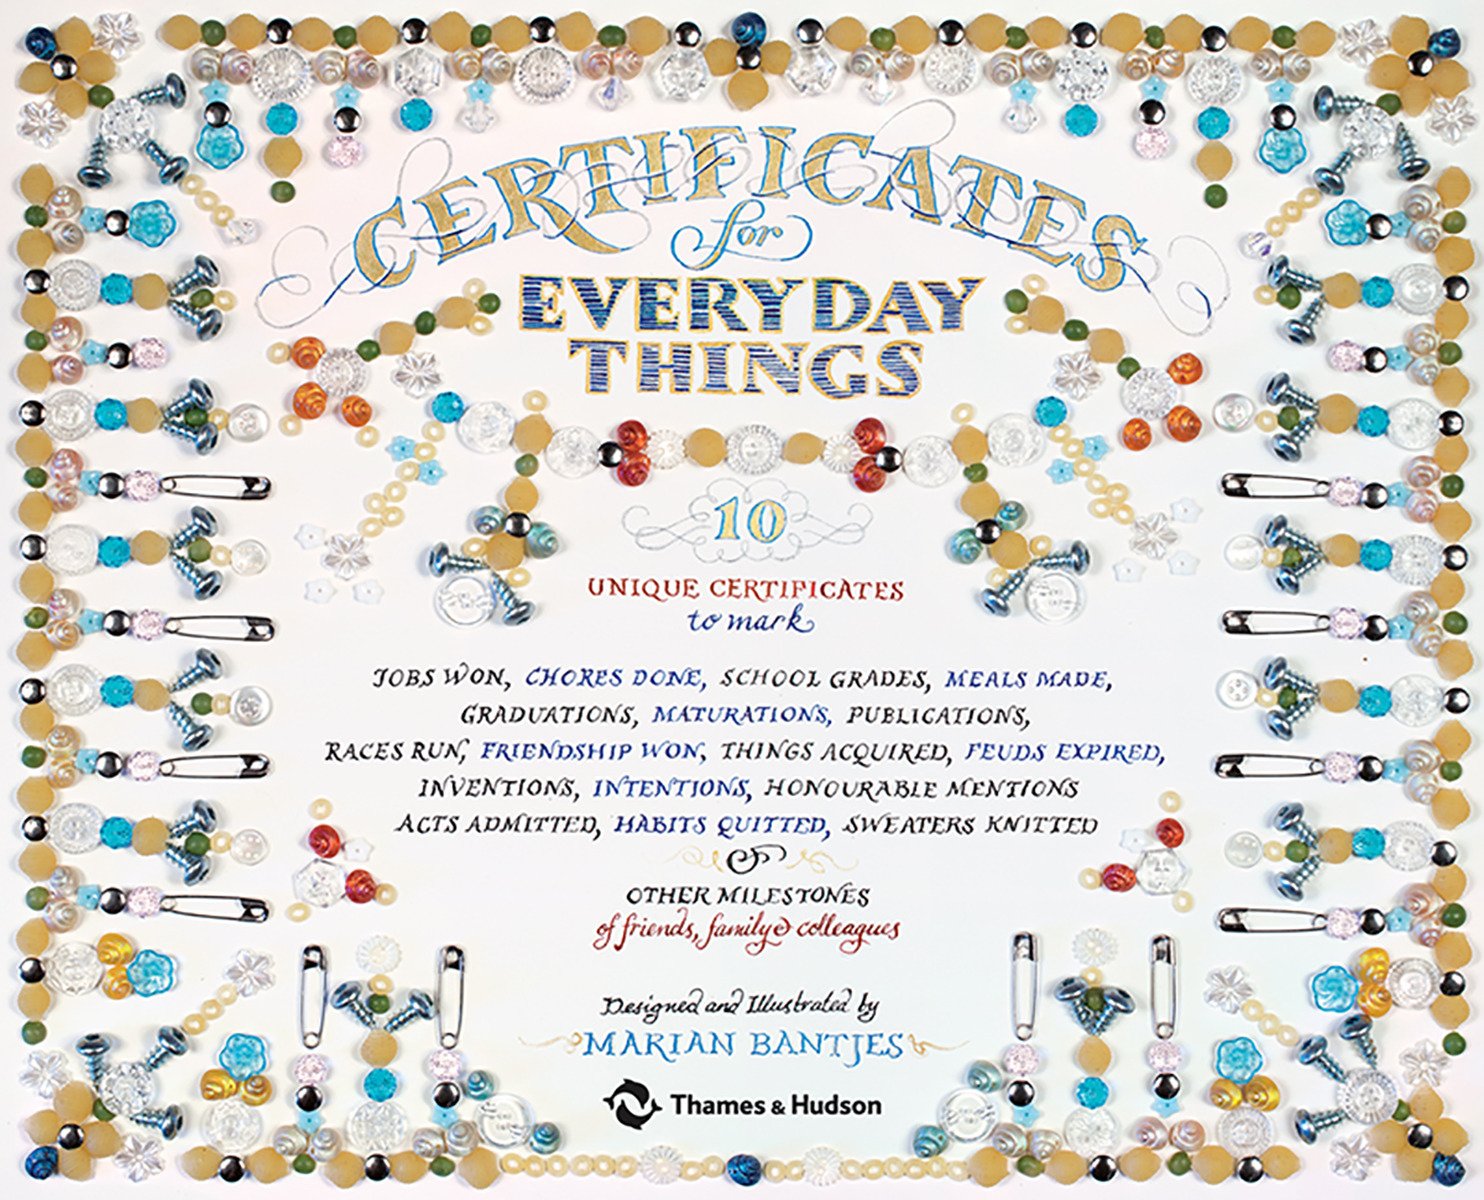 Certificates for Everyday Things | Marian Bantjej